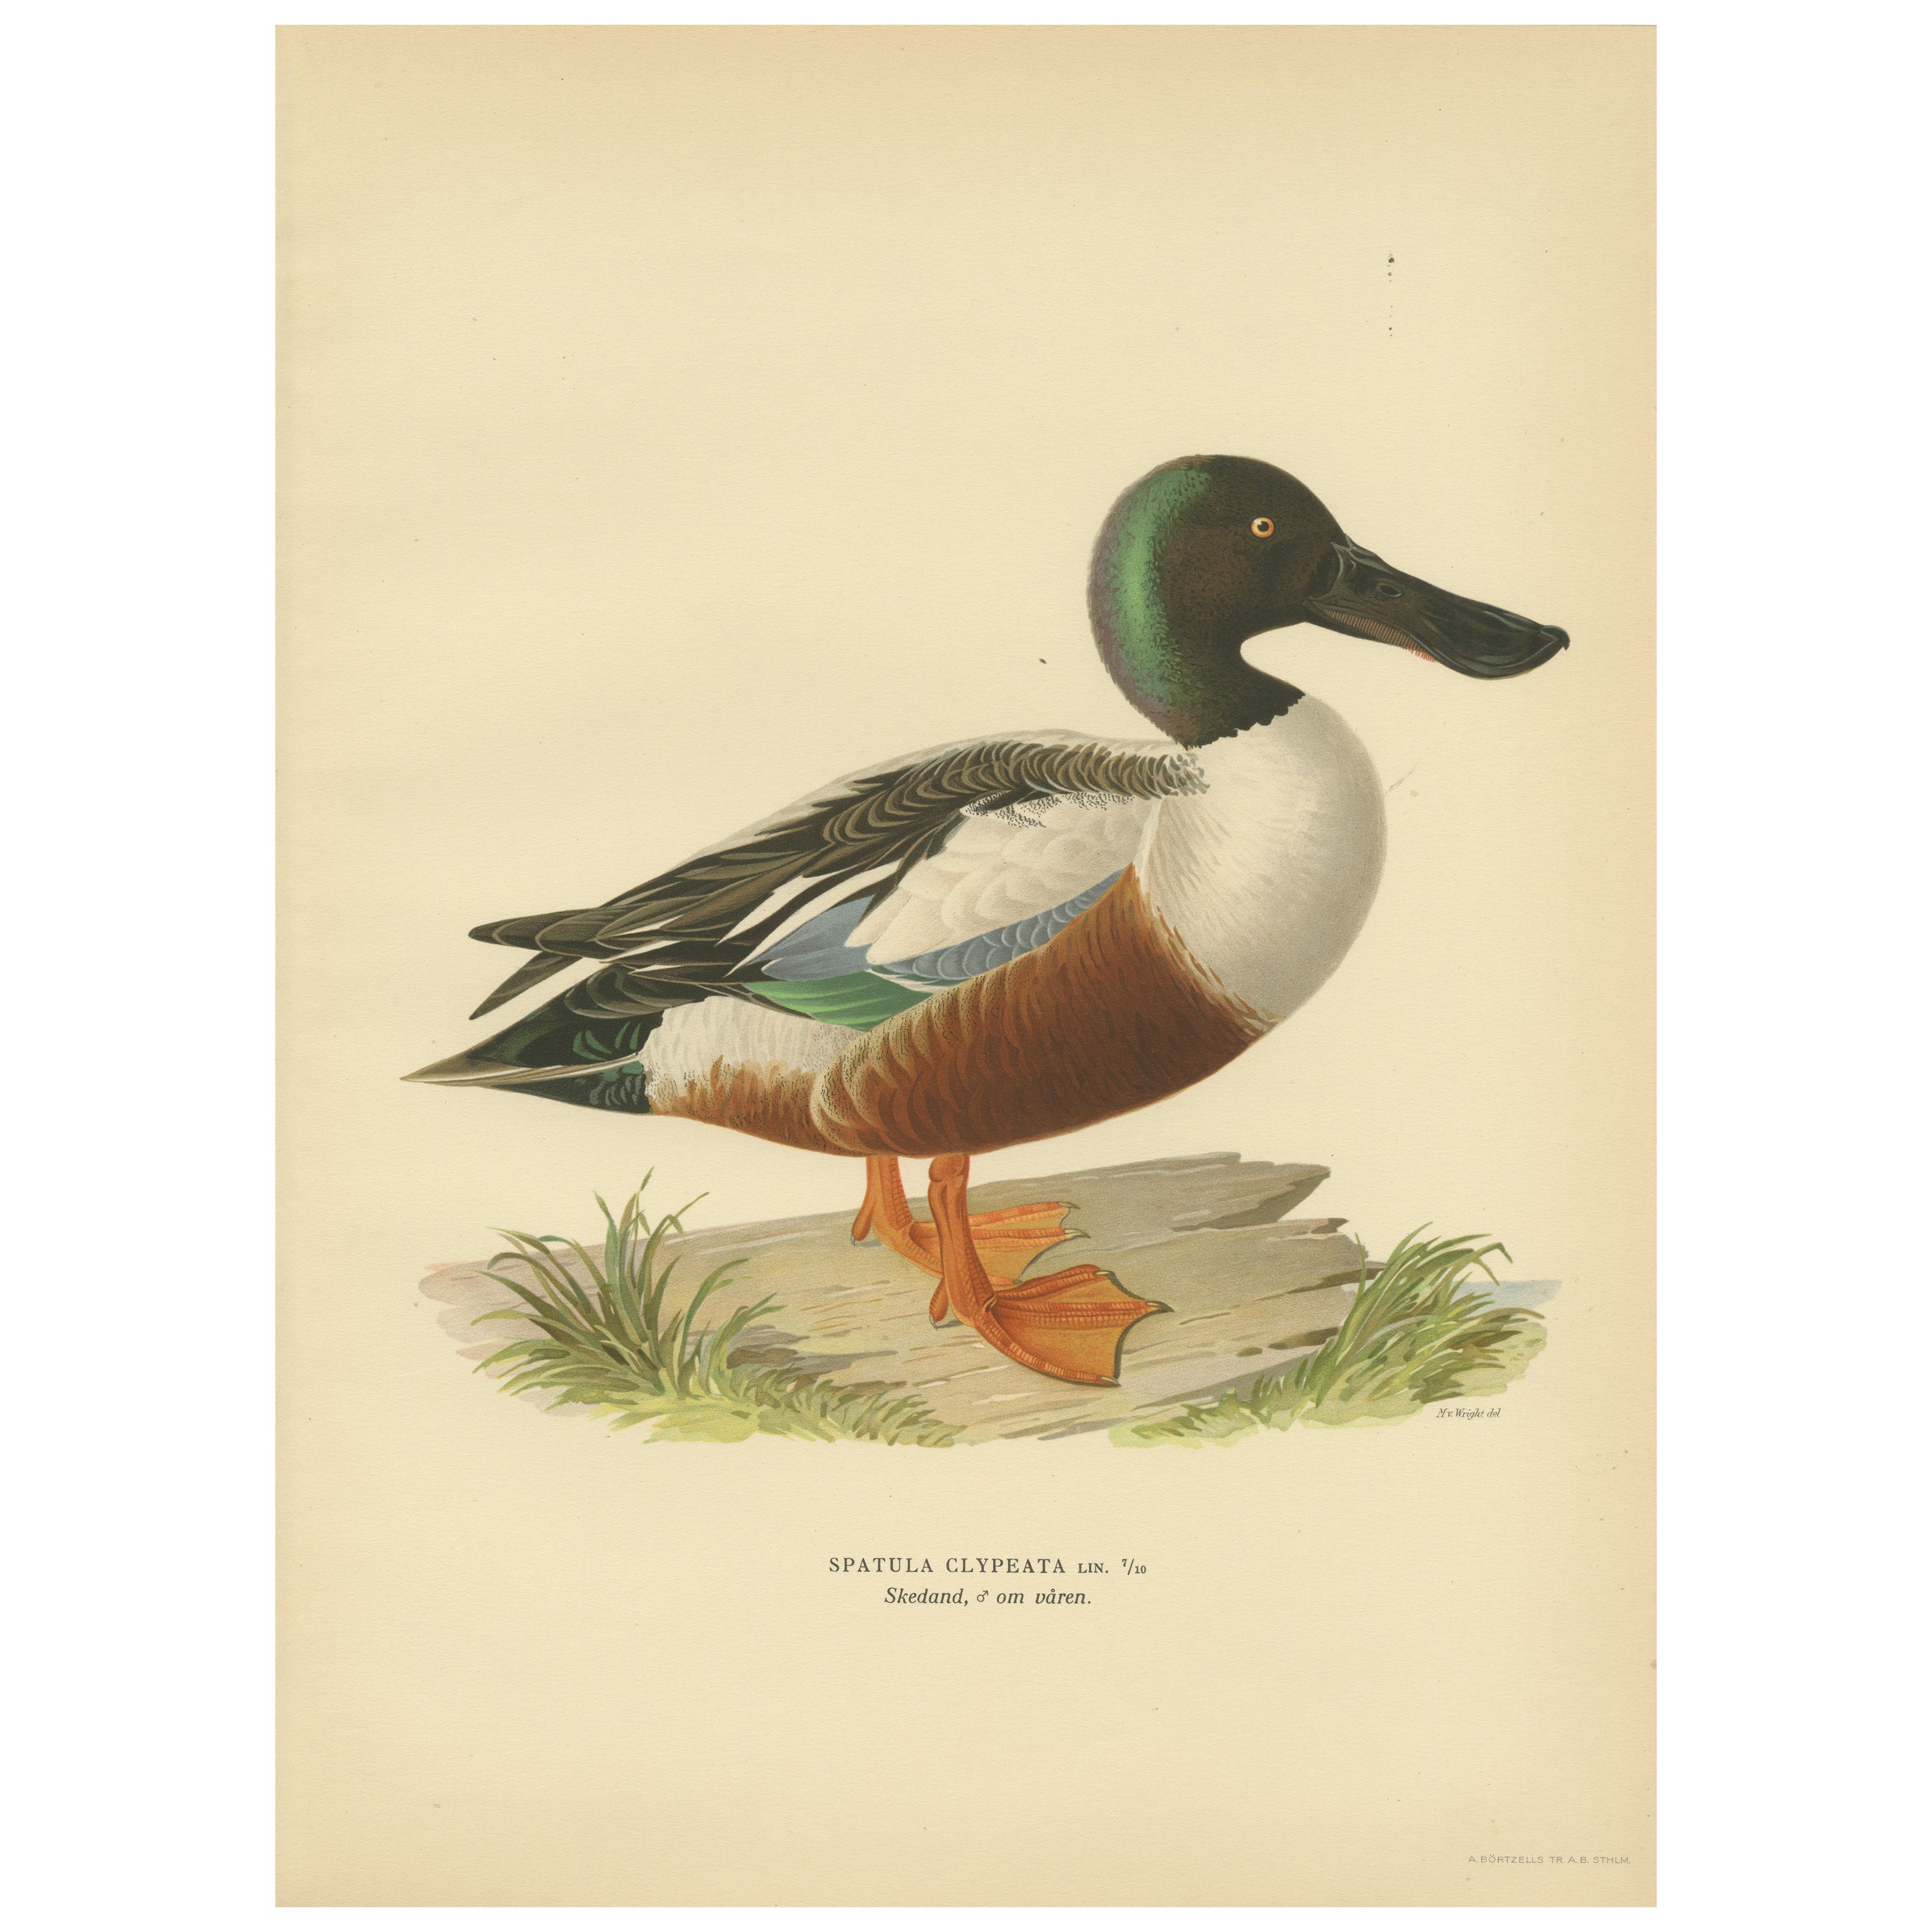 Northern Shoveler in Detail: A Study of Spatula Clypeata in Lithographie, 1929